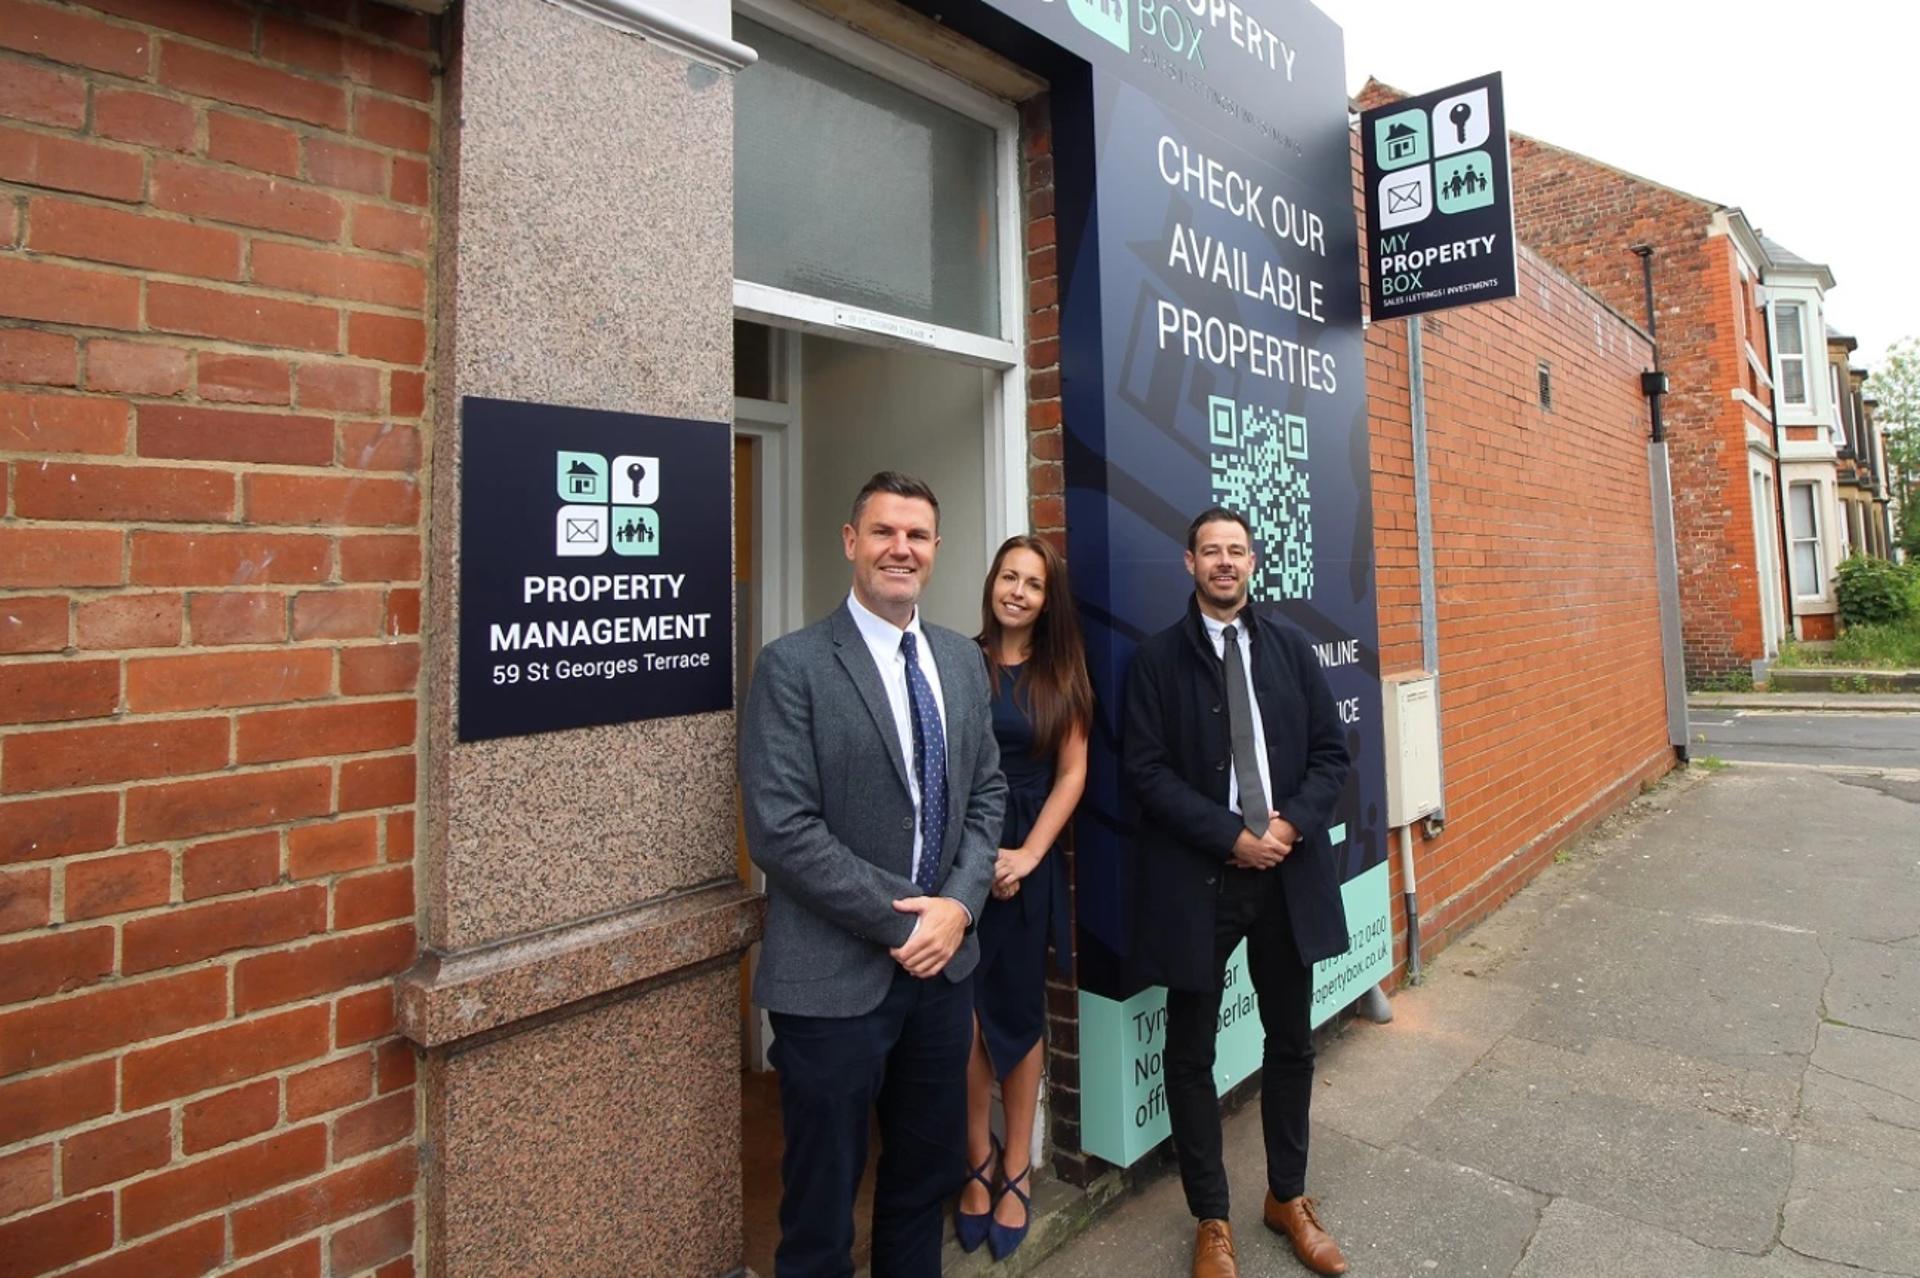 Lettings and property firm makes tenth acquisition